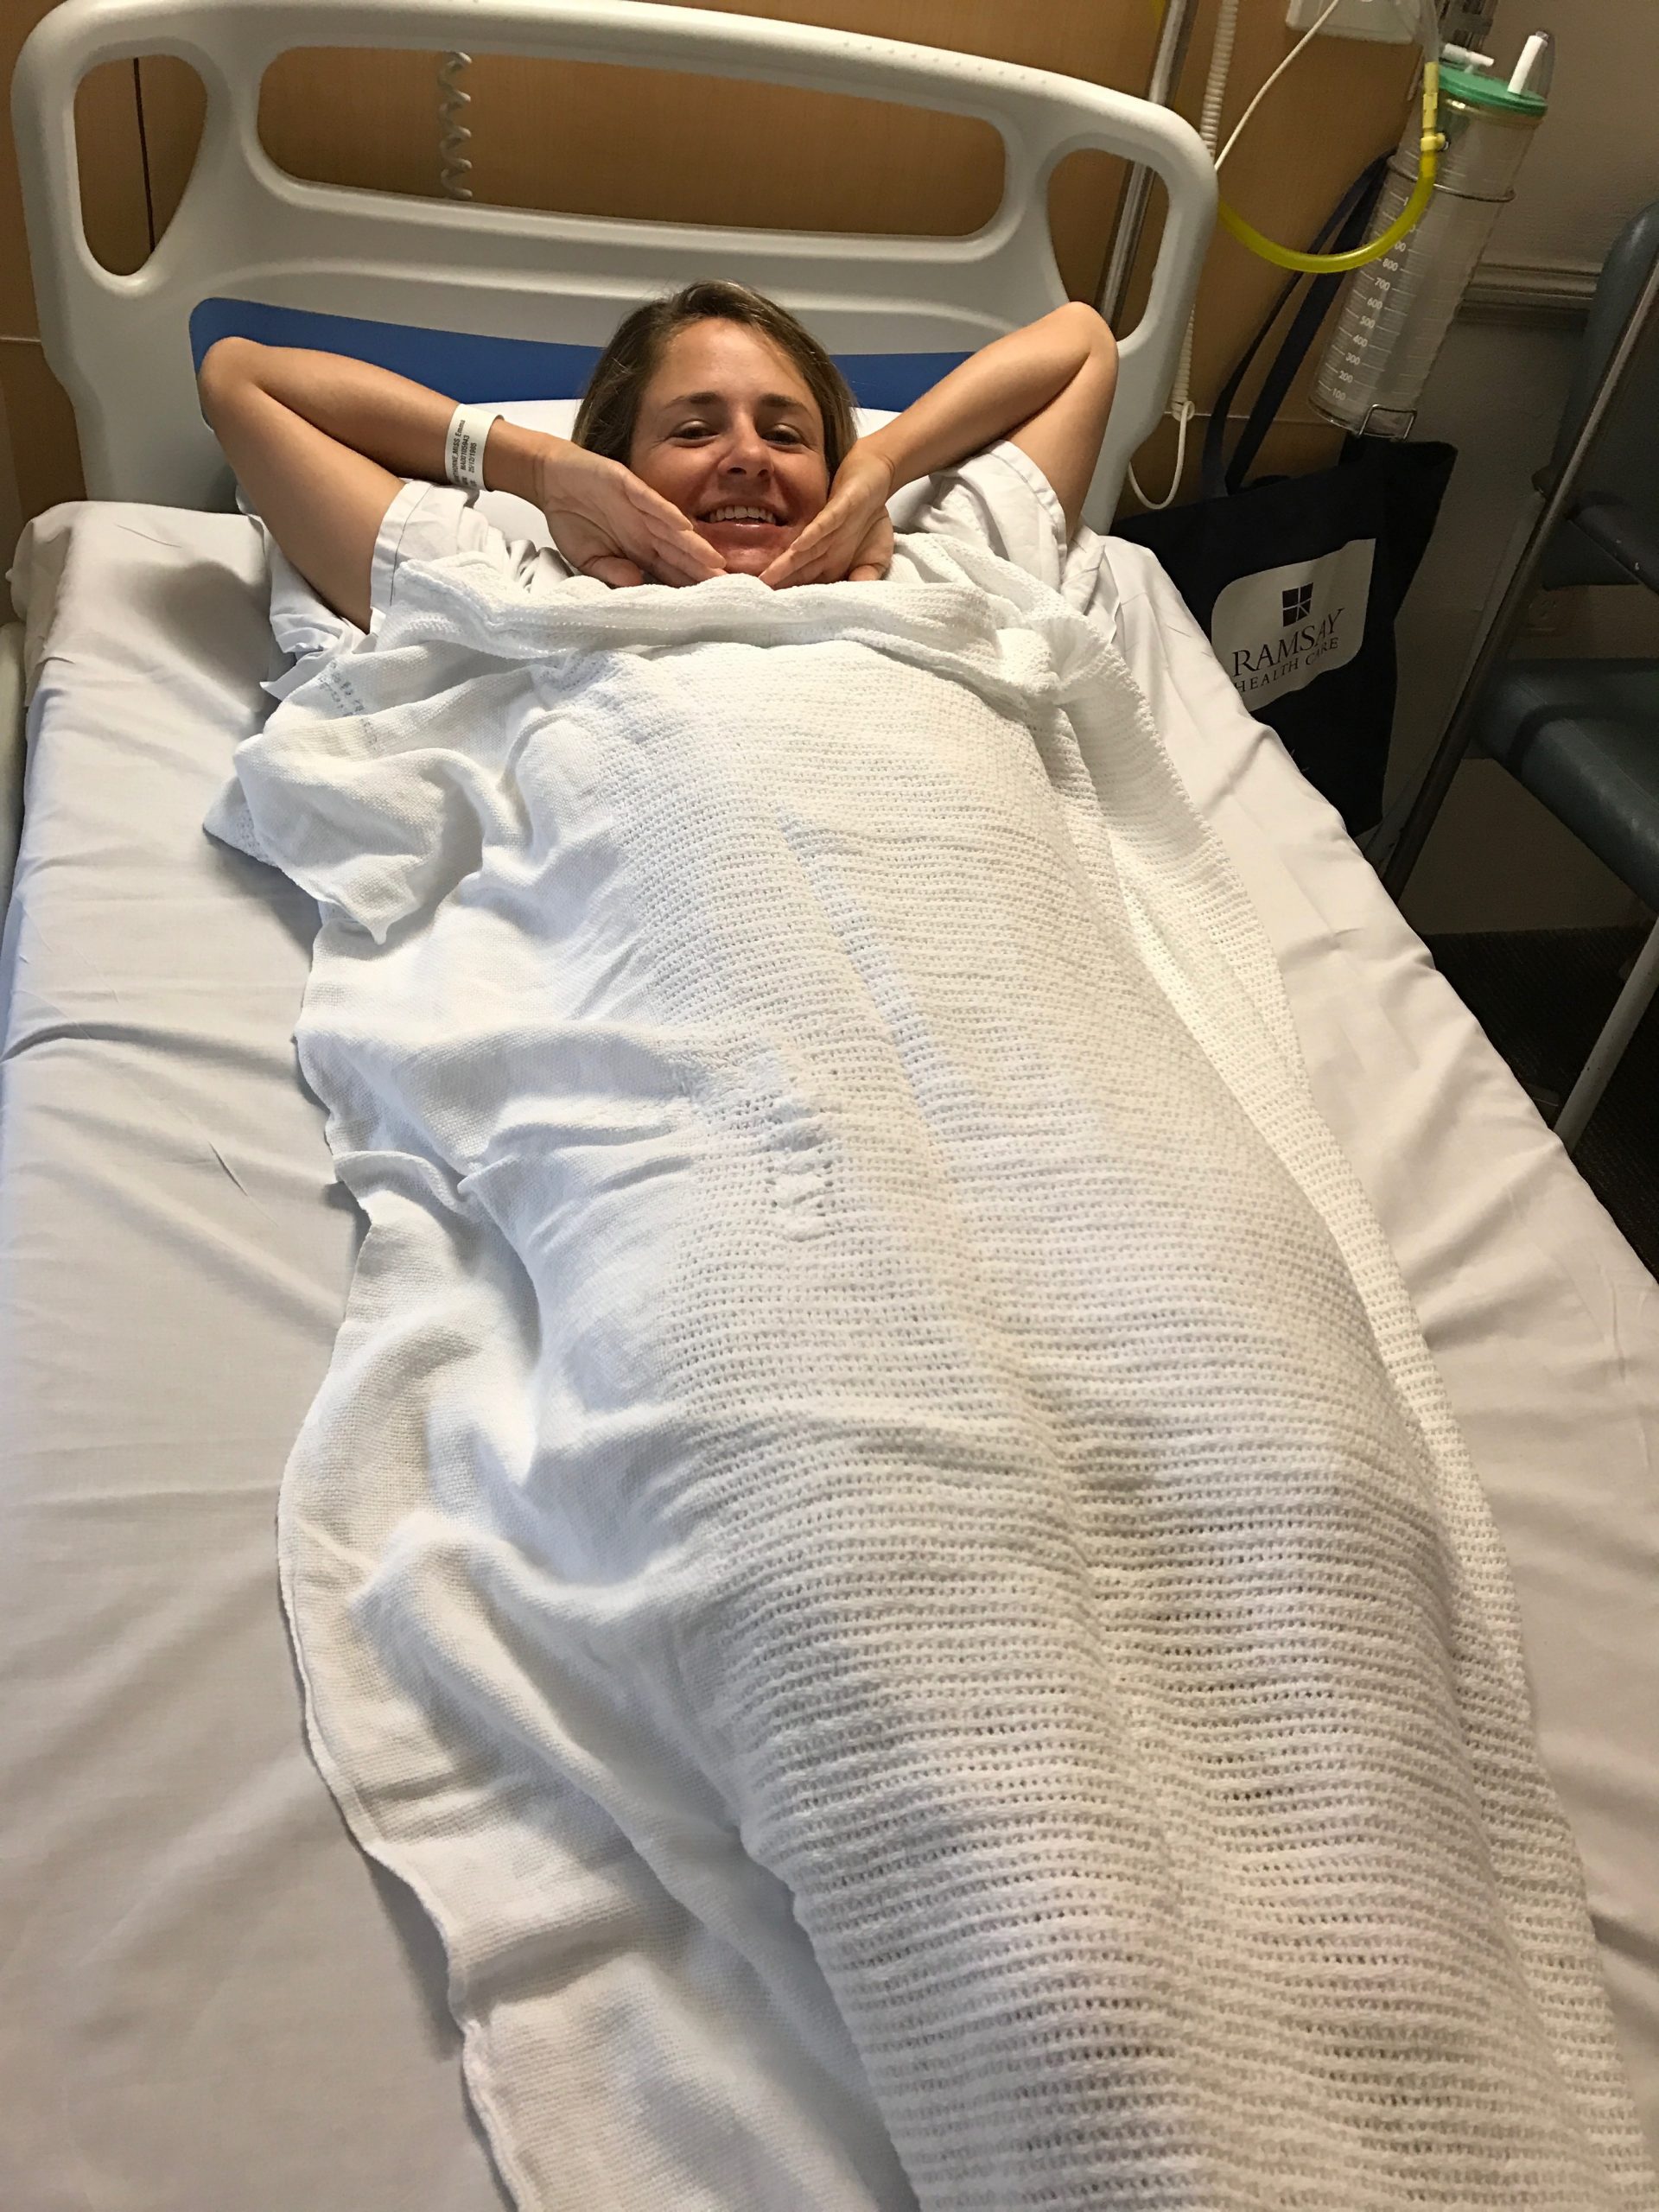 woman lying in hospital before surgery for a vocal injury